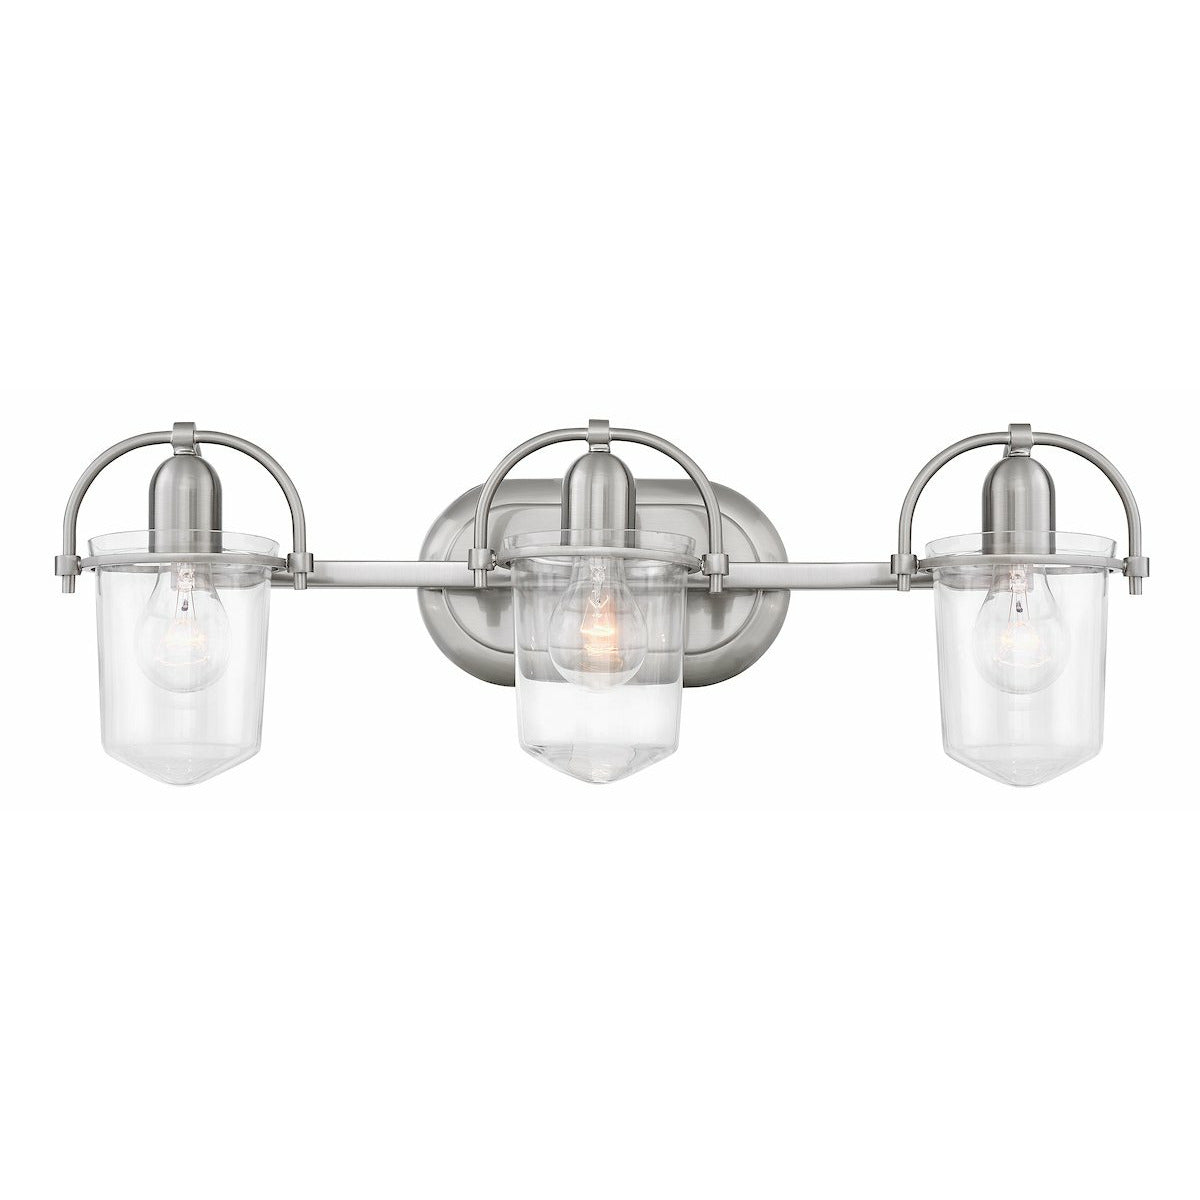 Clancy Vanity Light Brushed Nickel with Clear glass